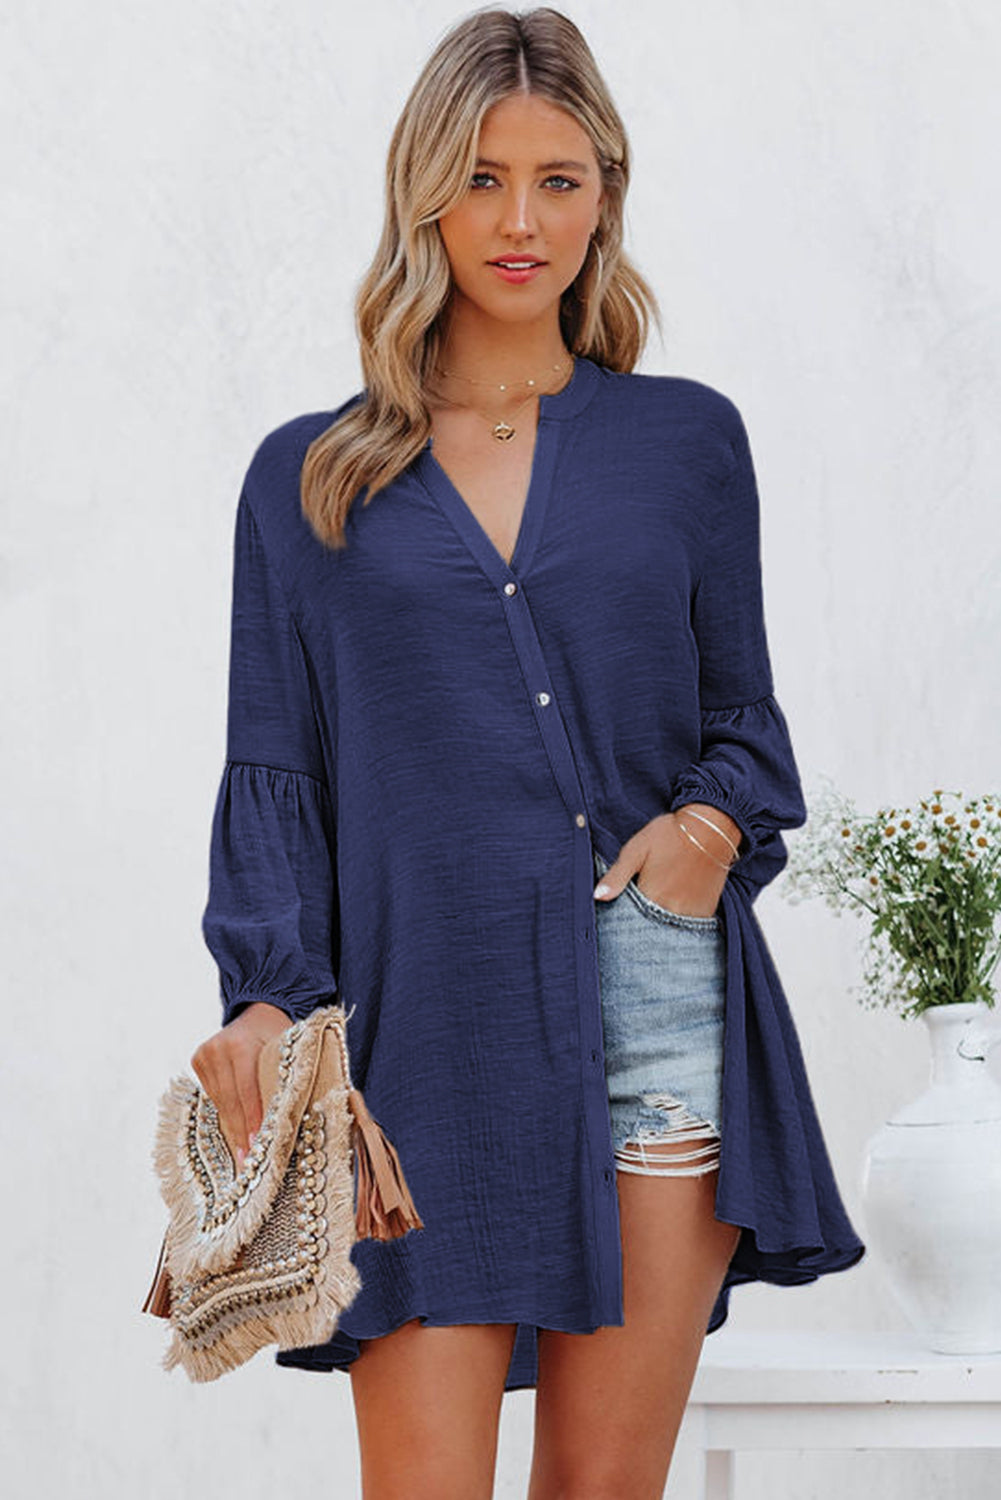 LC2552553-5-S, LC2552553-5-M, LC2552553-5-L, LC2552553-5-XL, LC2552553-5-2XL, Blue Womens Long Sleeve Oversized Blouses Tops Button Up Bishop Sleeve Shirt